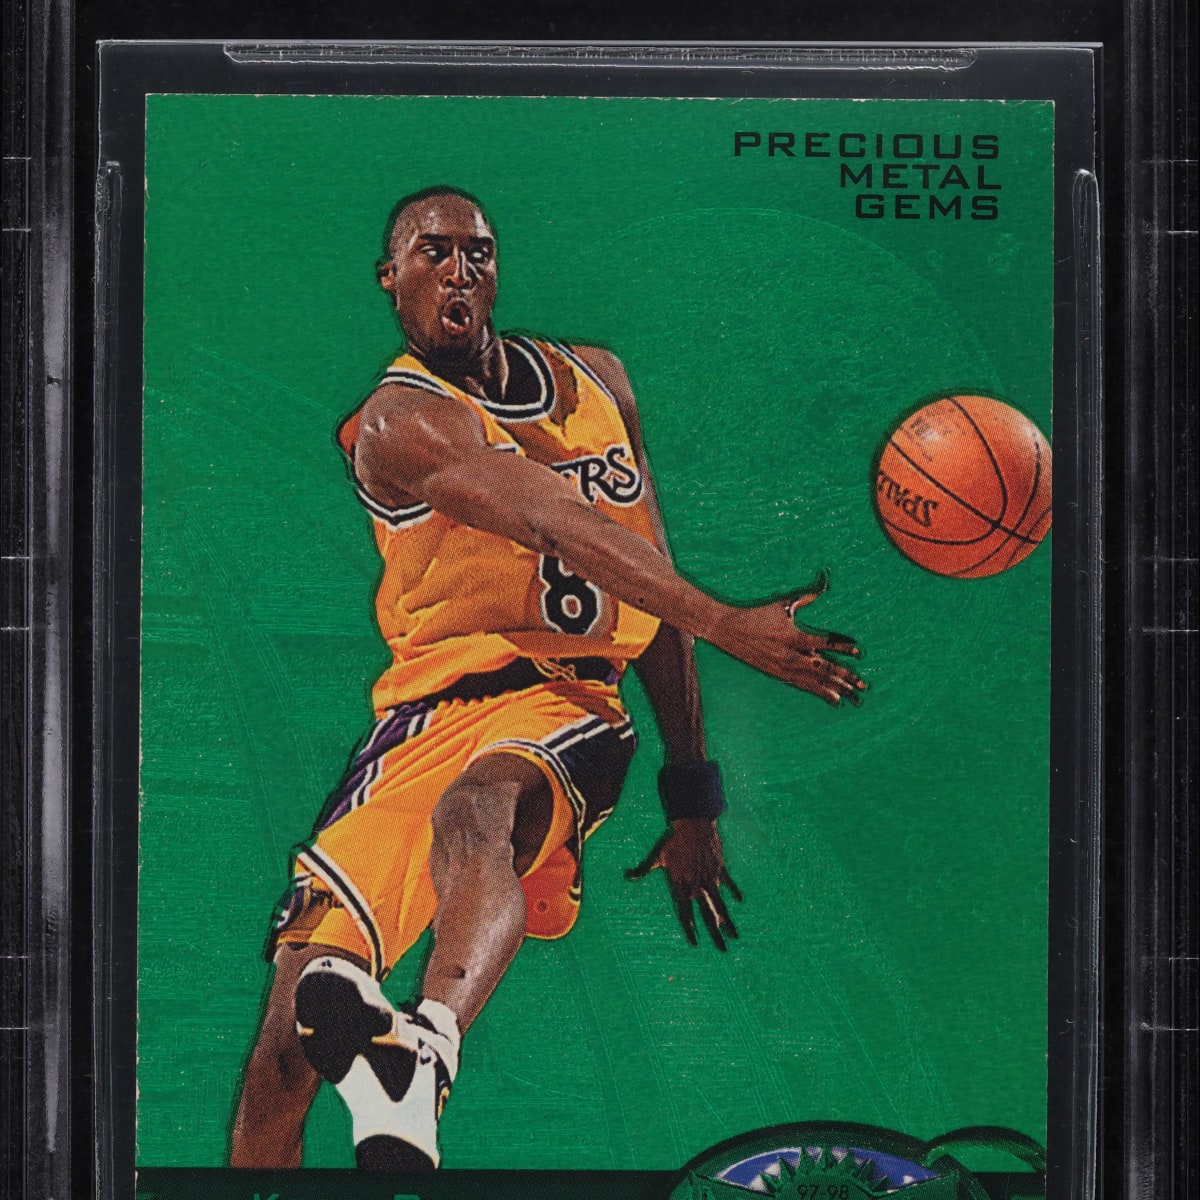 Rare Kobe Bryant card sets record with $2M sale - Sports ...